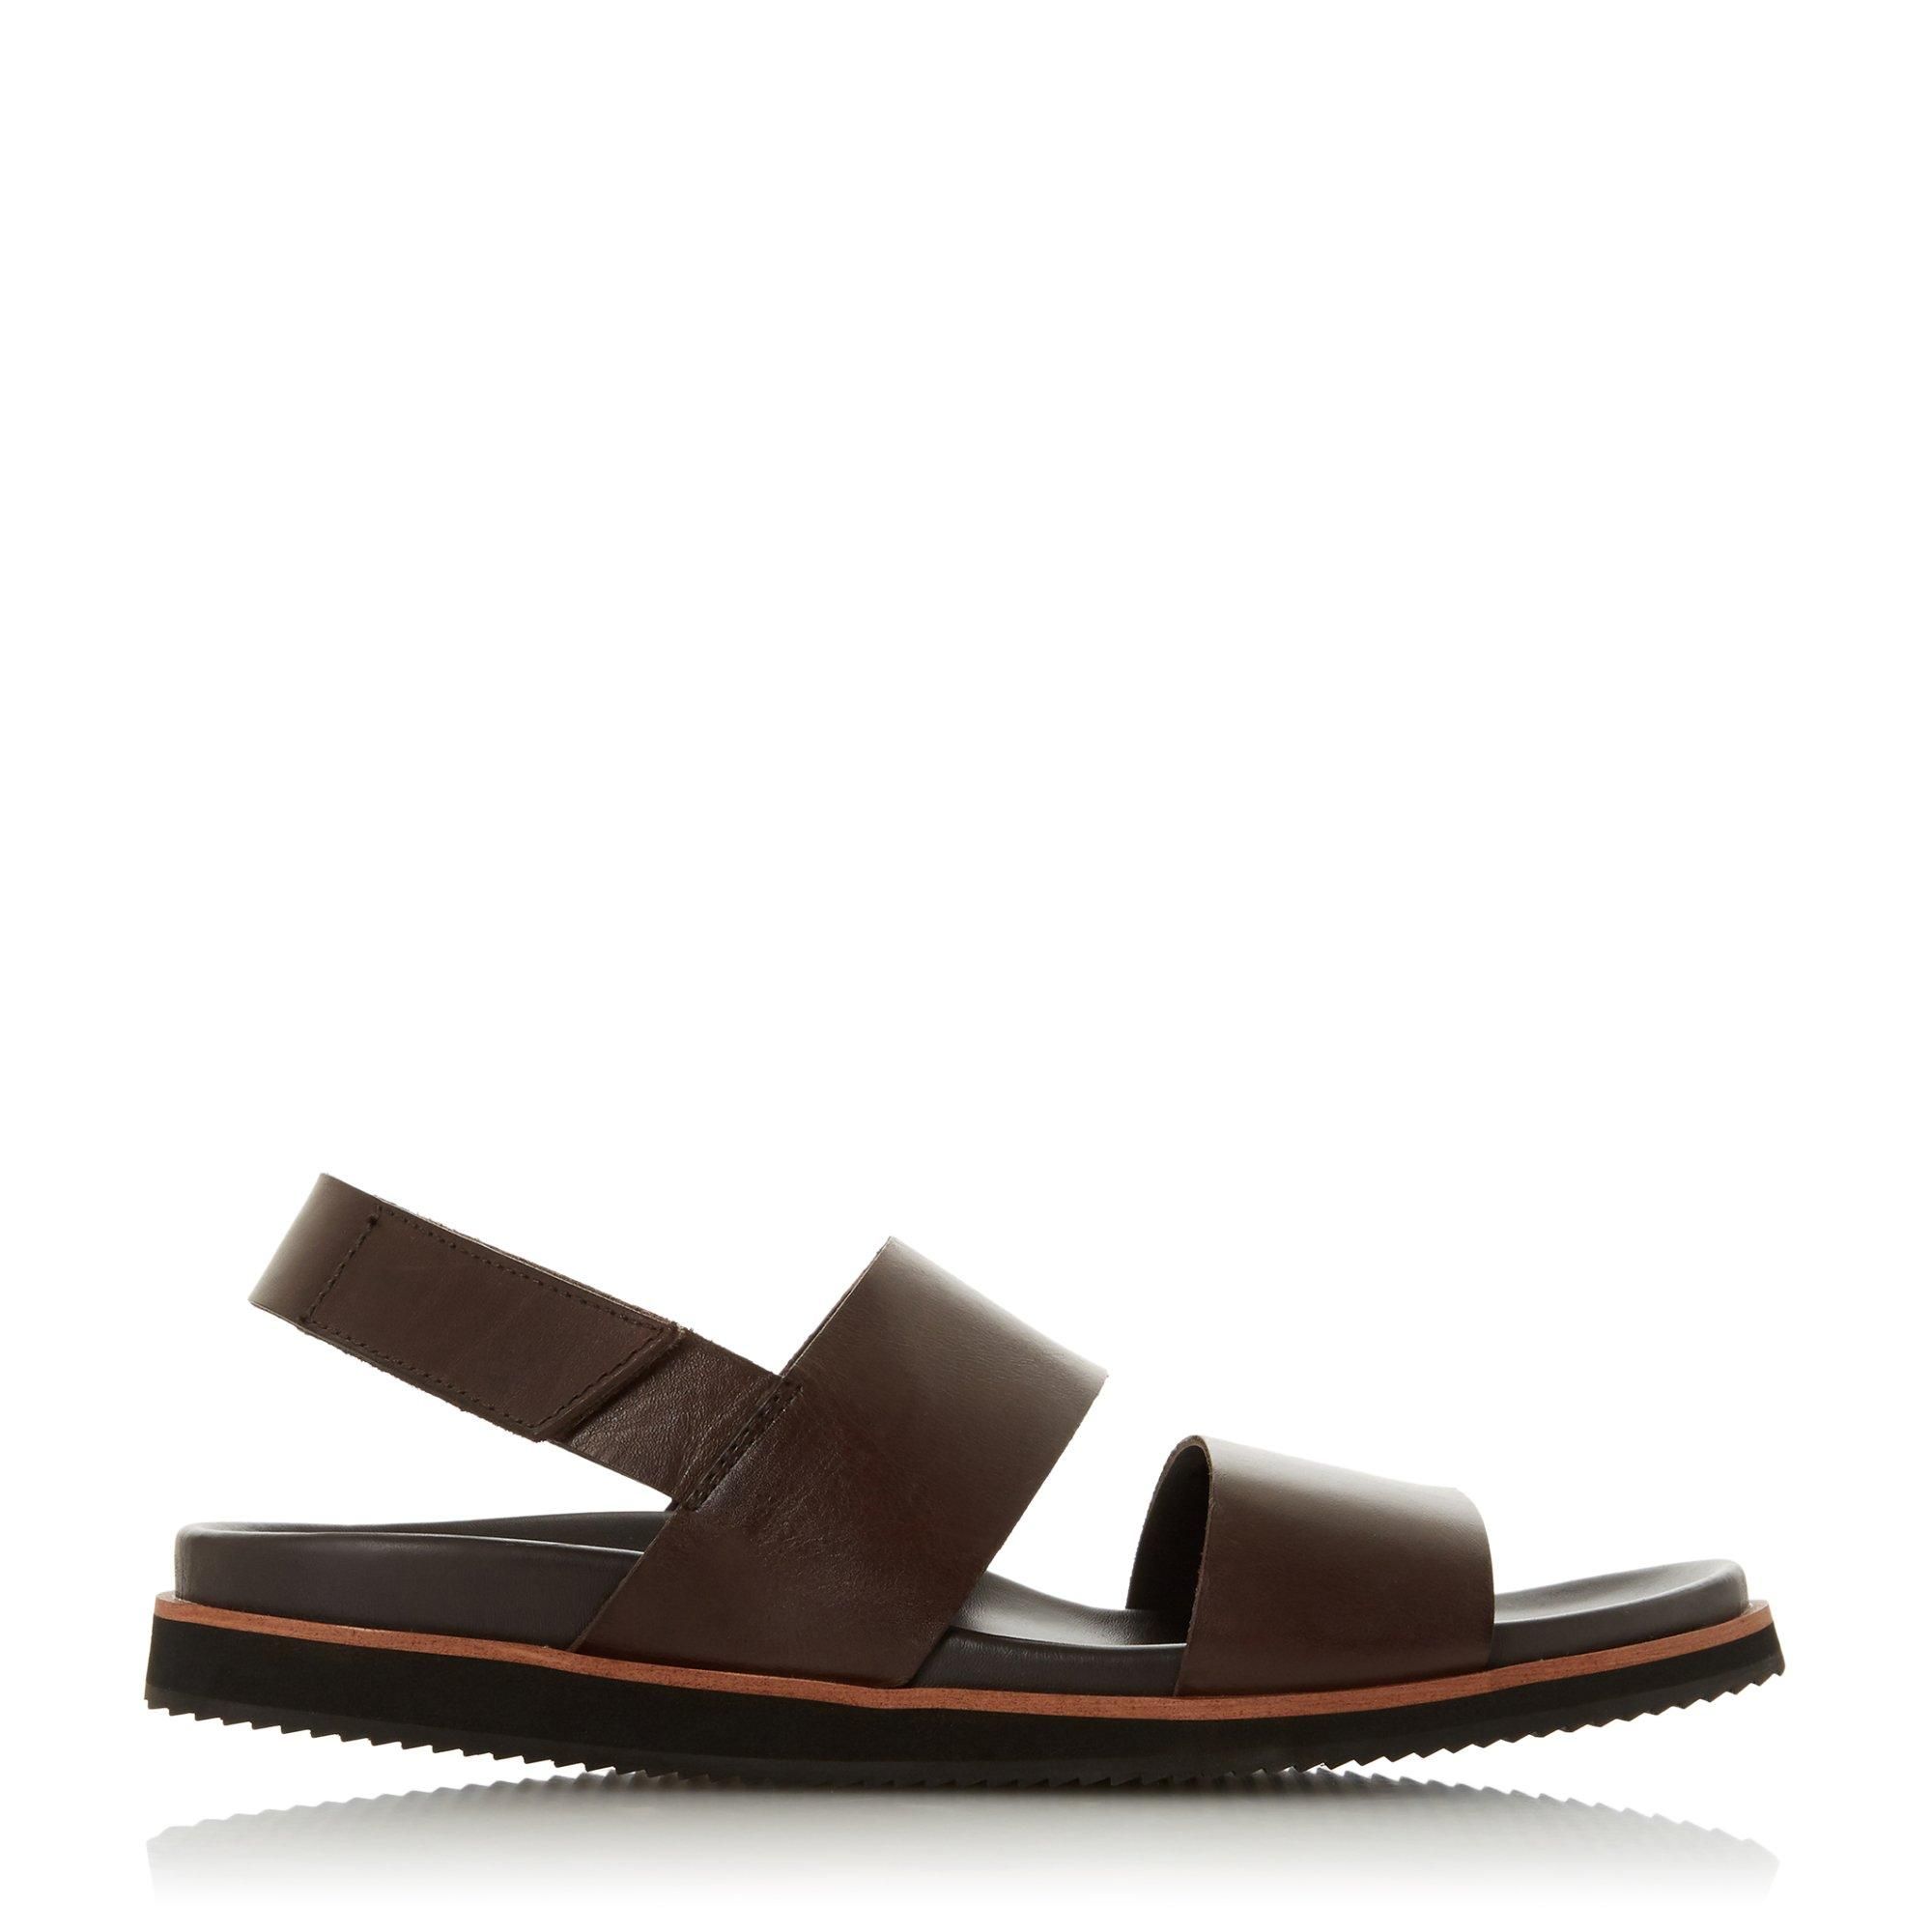 Upgrade your poolside edit with the Irons strap sandal from Bertie. Crafted in smooth leather, it features a sleek double strap design. With a classic wedge sole for style and comfort throughout the day.